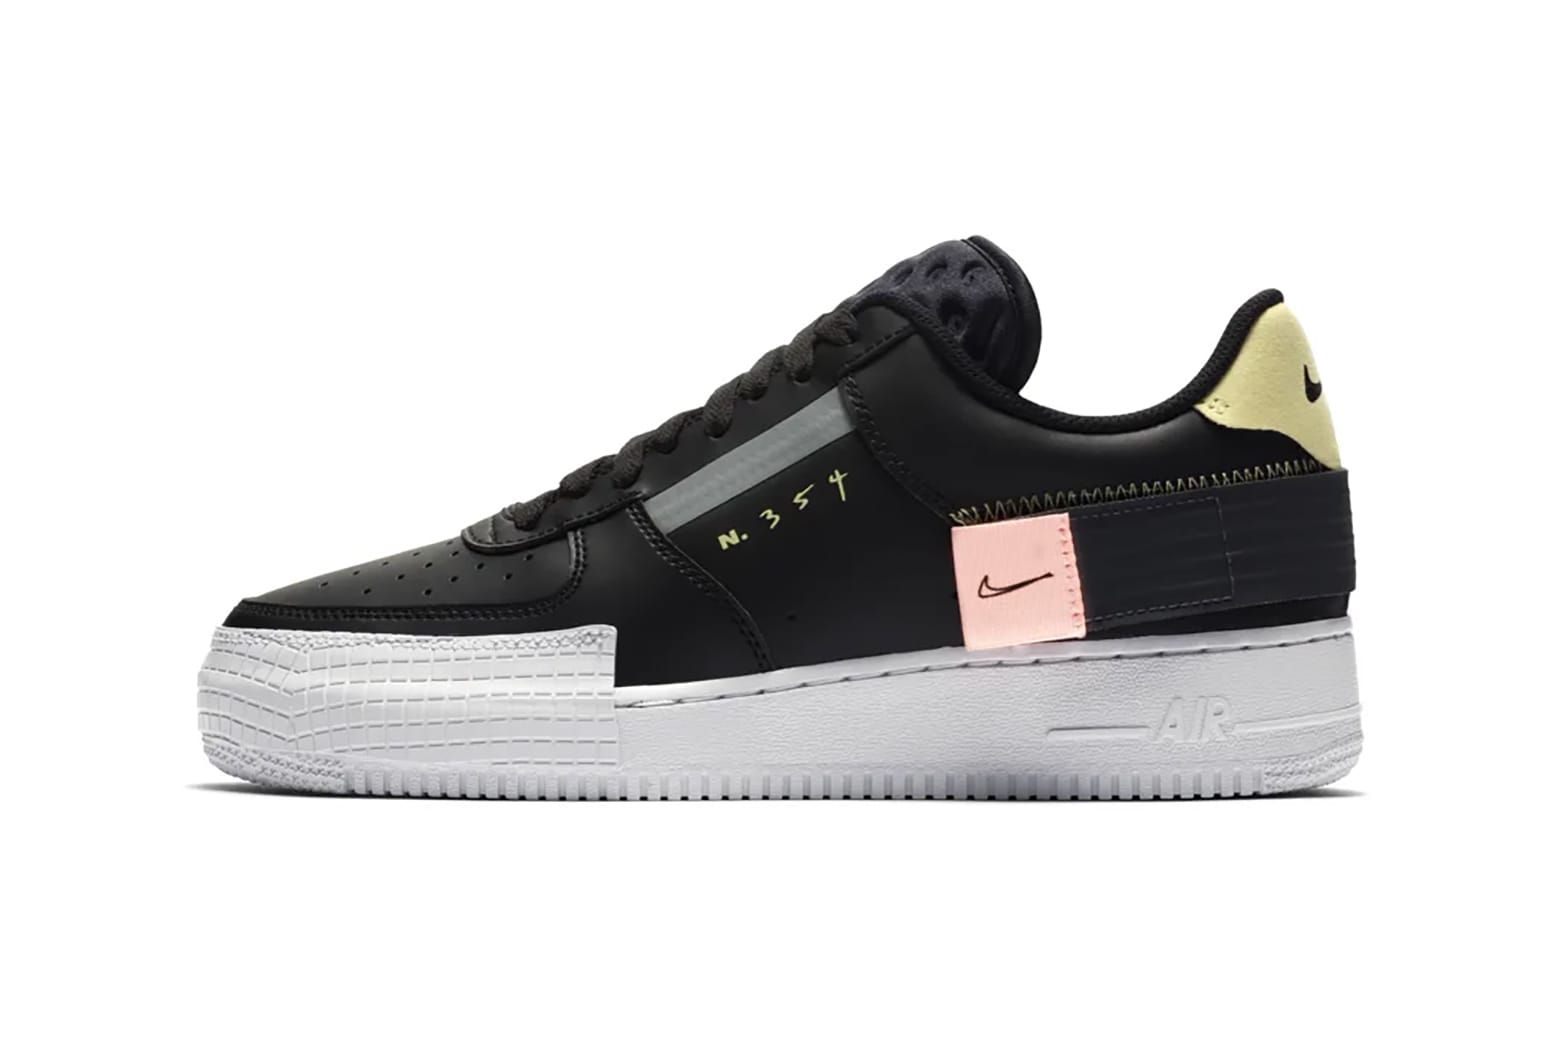 Nike's Air Force 1 and Drop-Type LX in 